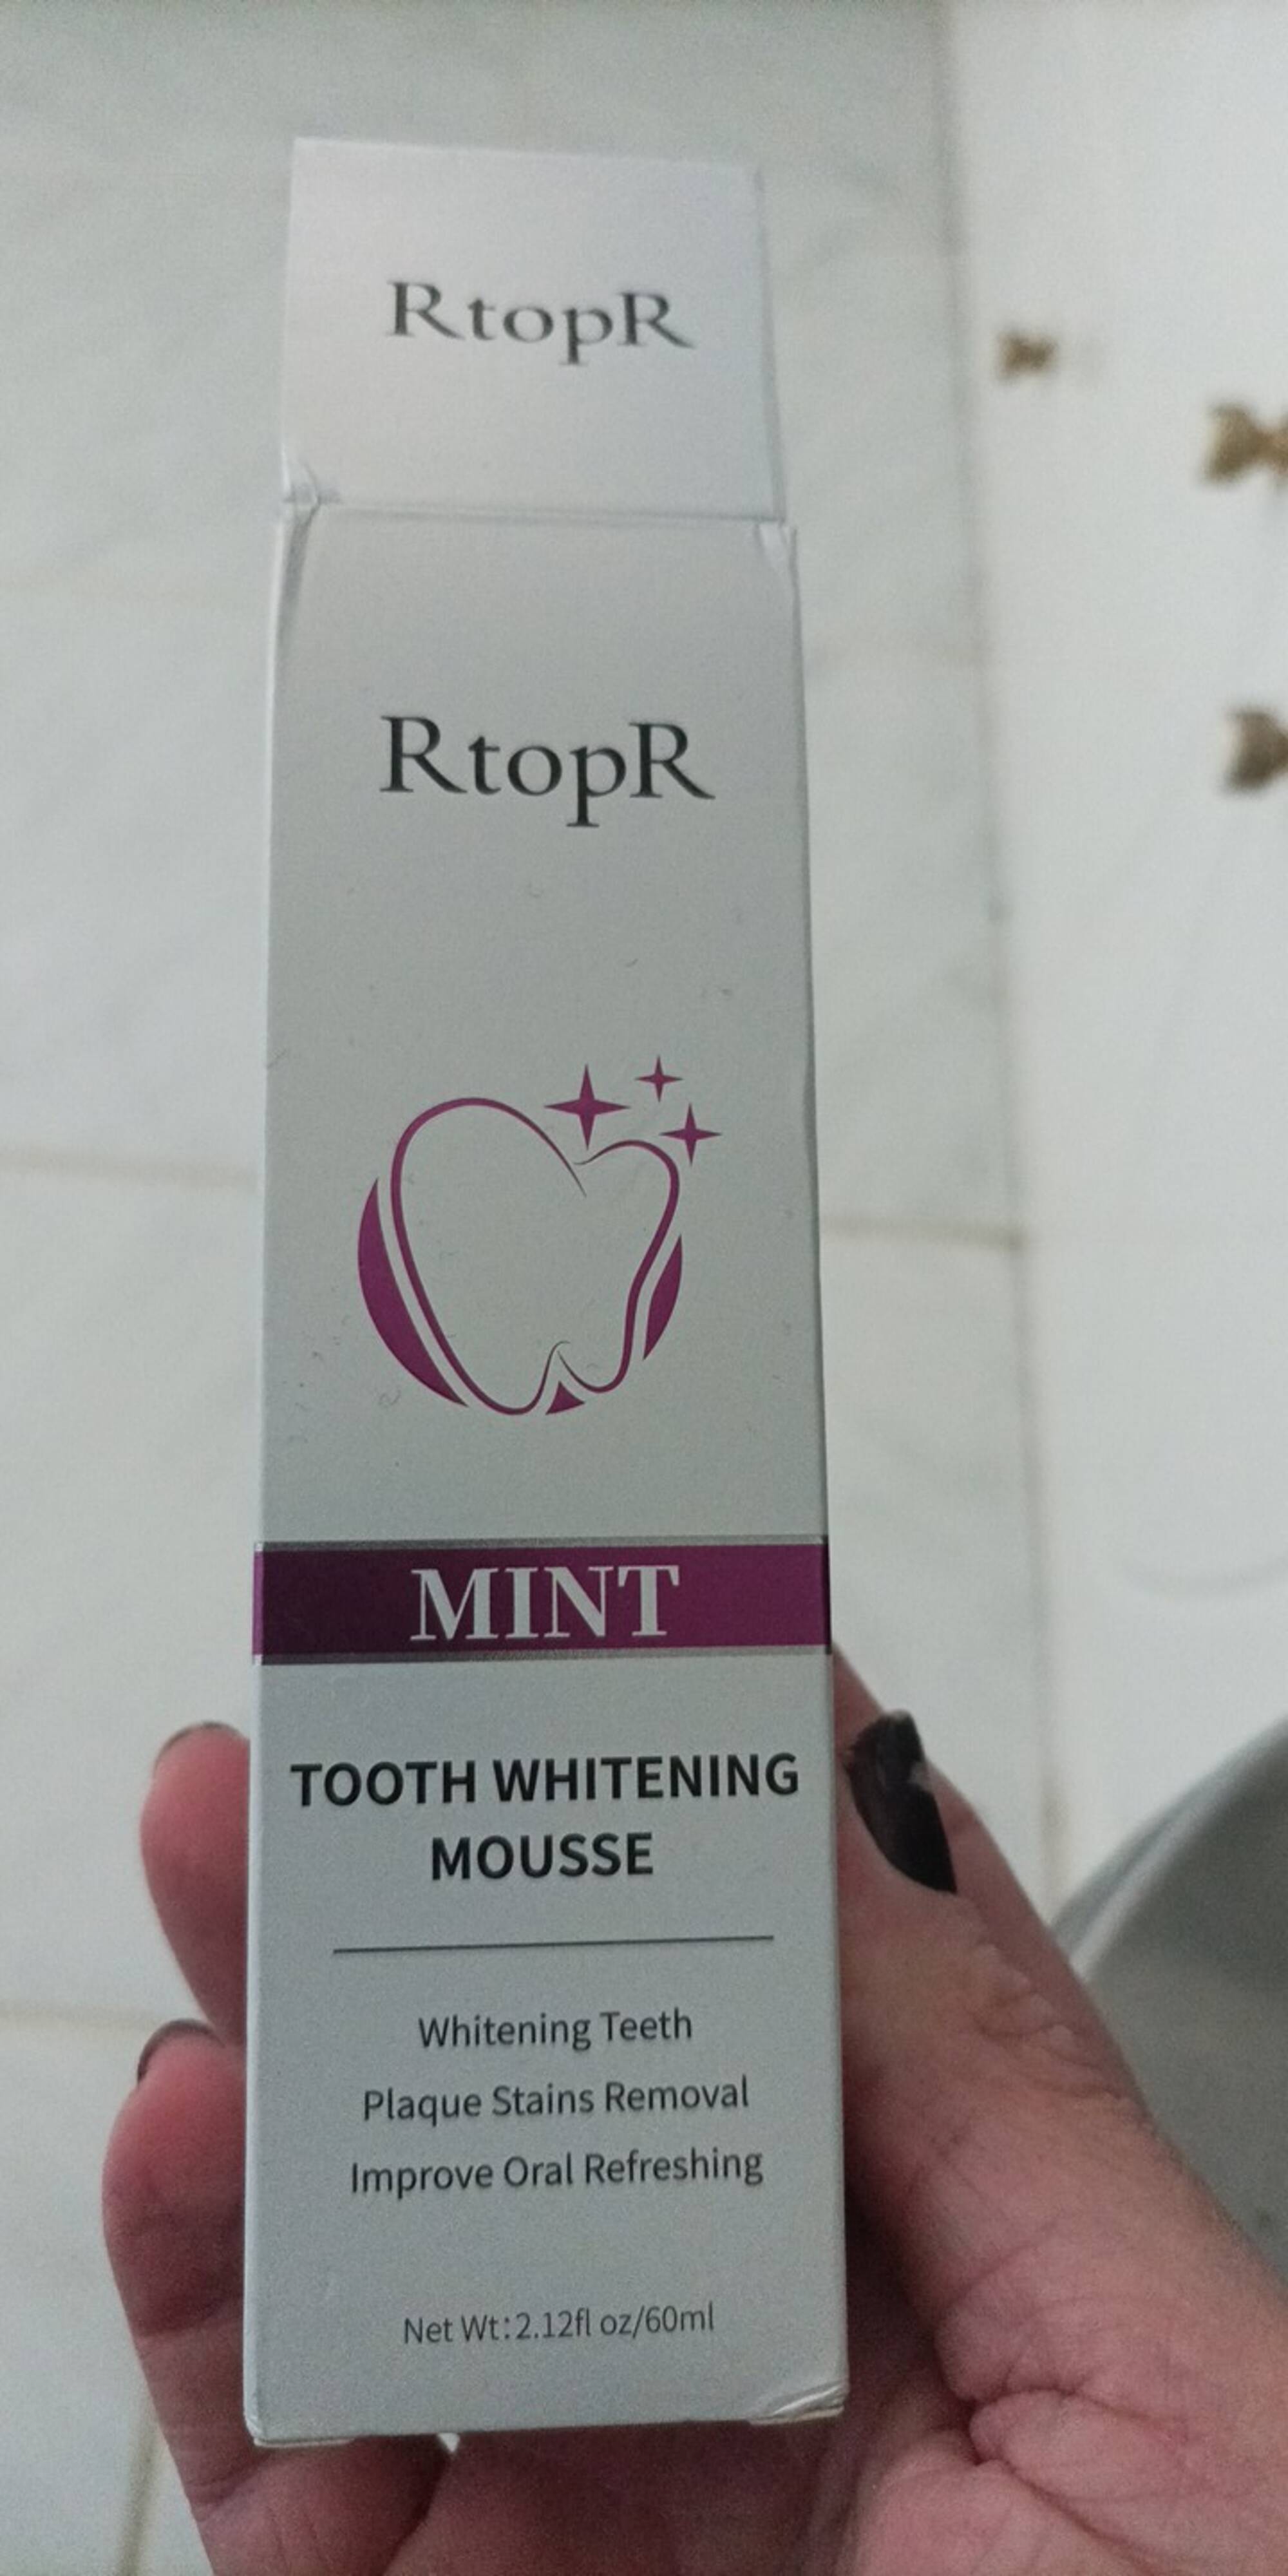 RTOPR - Mint - Tooth whitening mousse